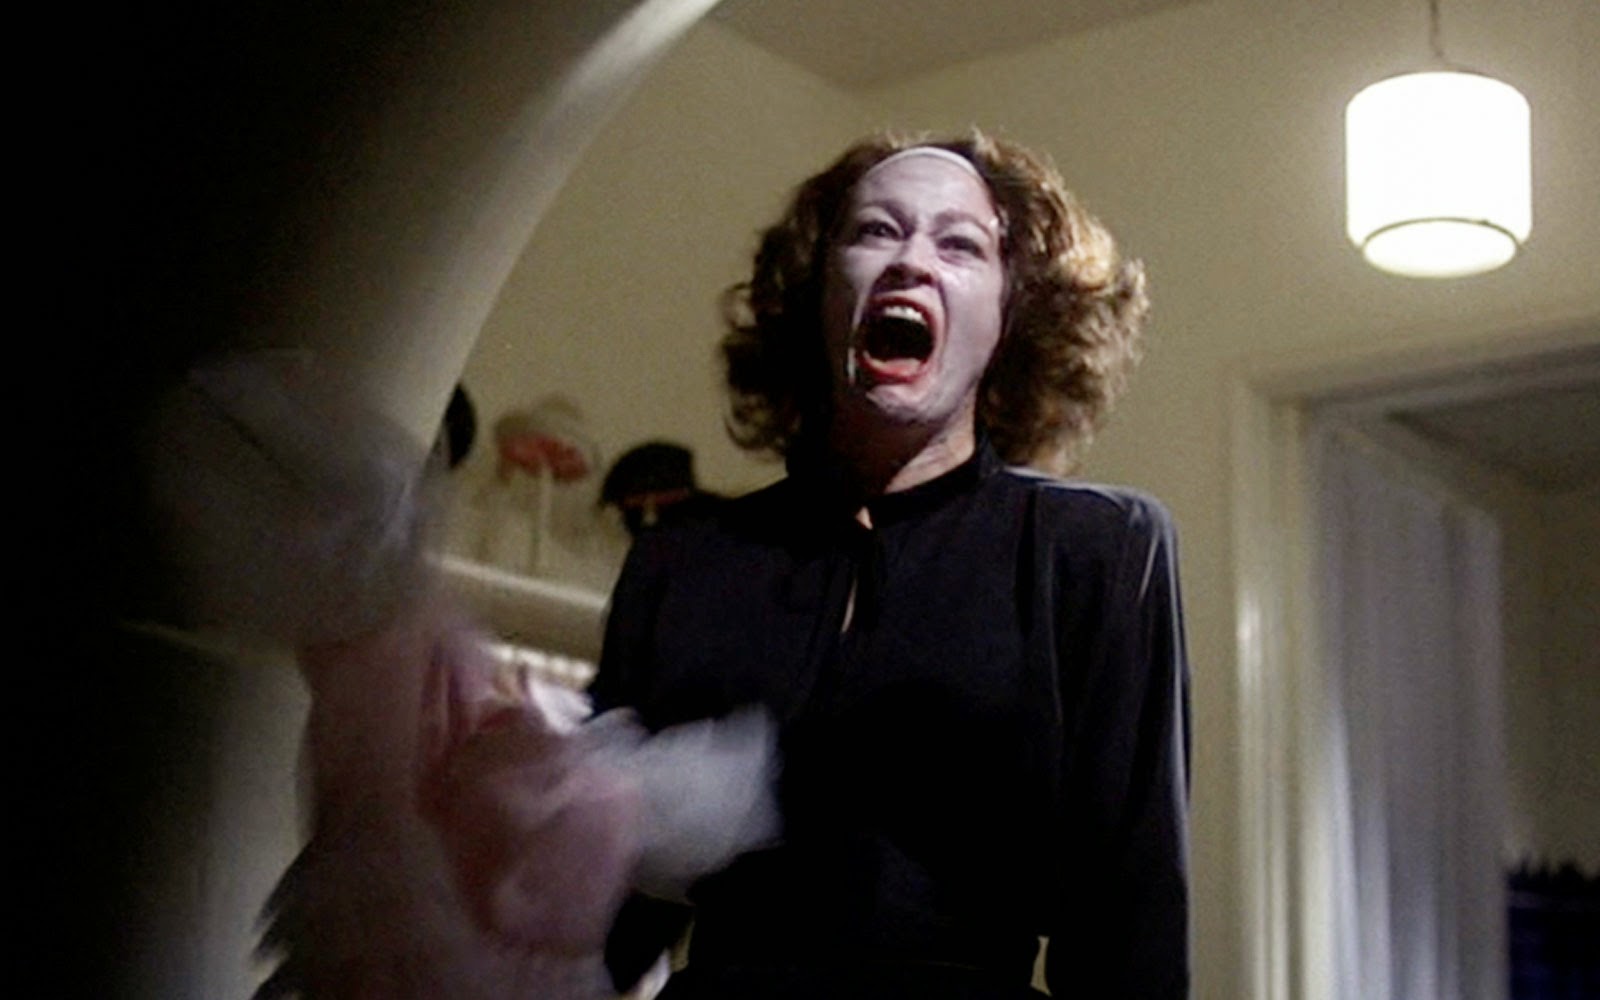 The Shadow in Film: Joan Crawford, Mommie Dearest. Faye Dunaway portrays the legendary actress in this biographical drama that portray’s Crawford’s abusive relationship with her daughter. In the movie she is is a driven actress and compulsively clean housekeeper who tries to control the lives of those around her as tightly as she controls herself.